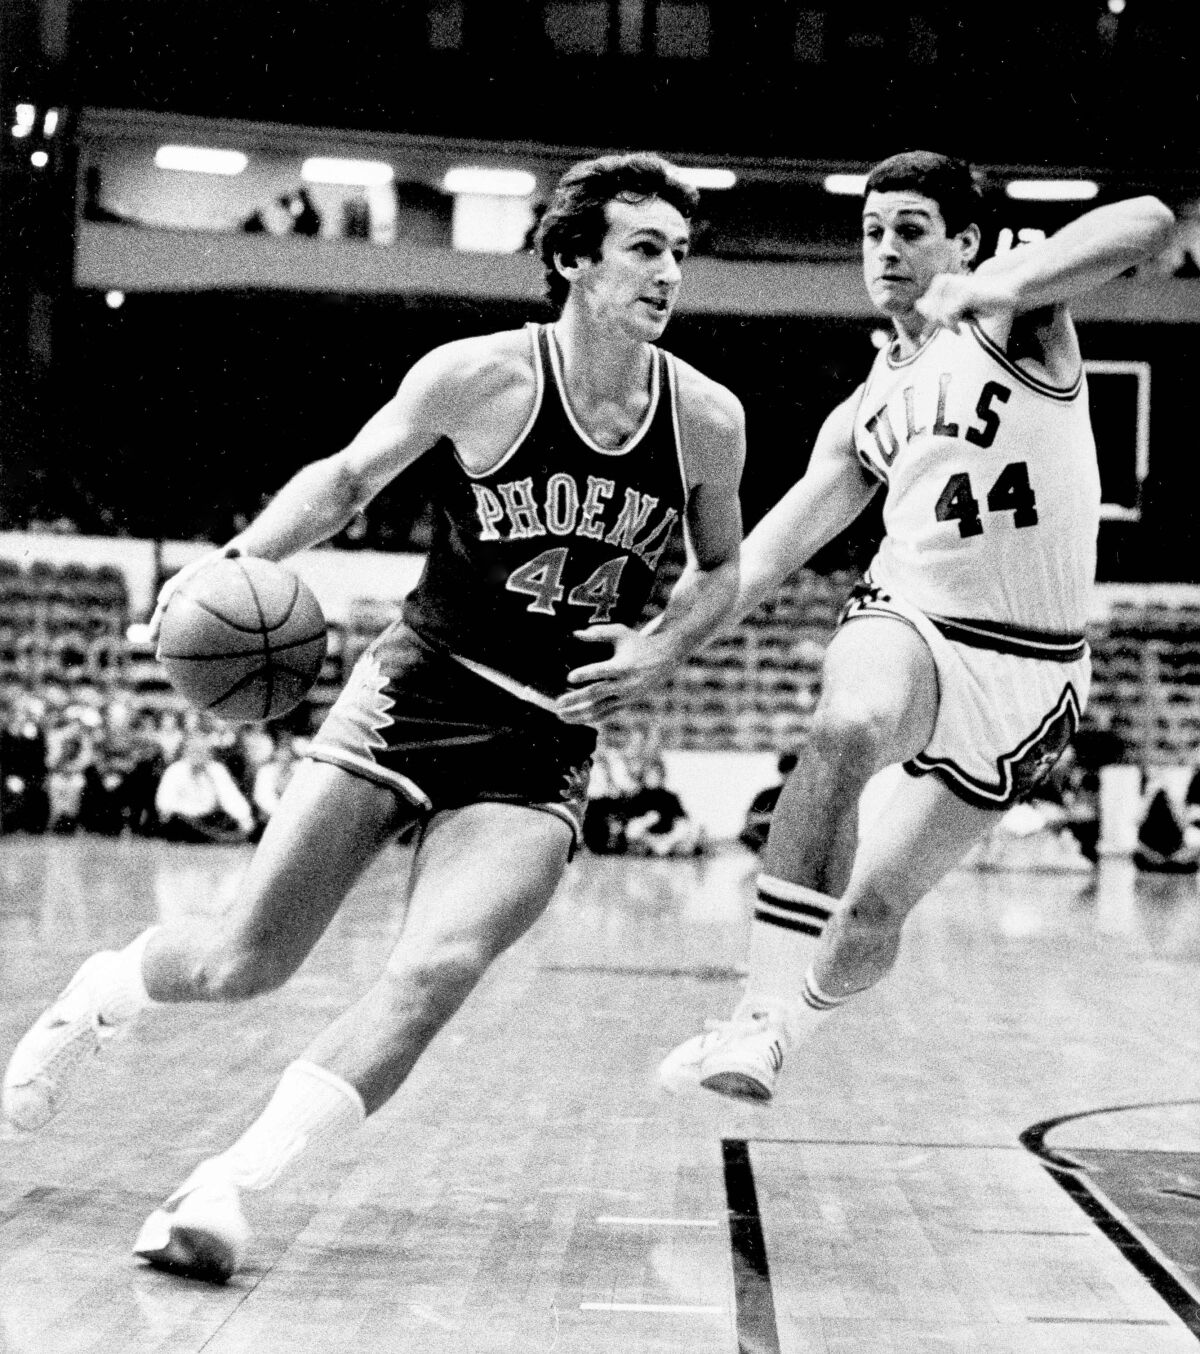 Phoenix Suns guard Paul Westphal, left, drives to the basket ahead of Chicago Bulls guard Tom Kropp during the 1976 season.